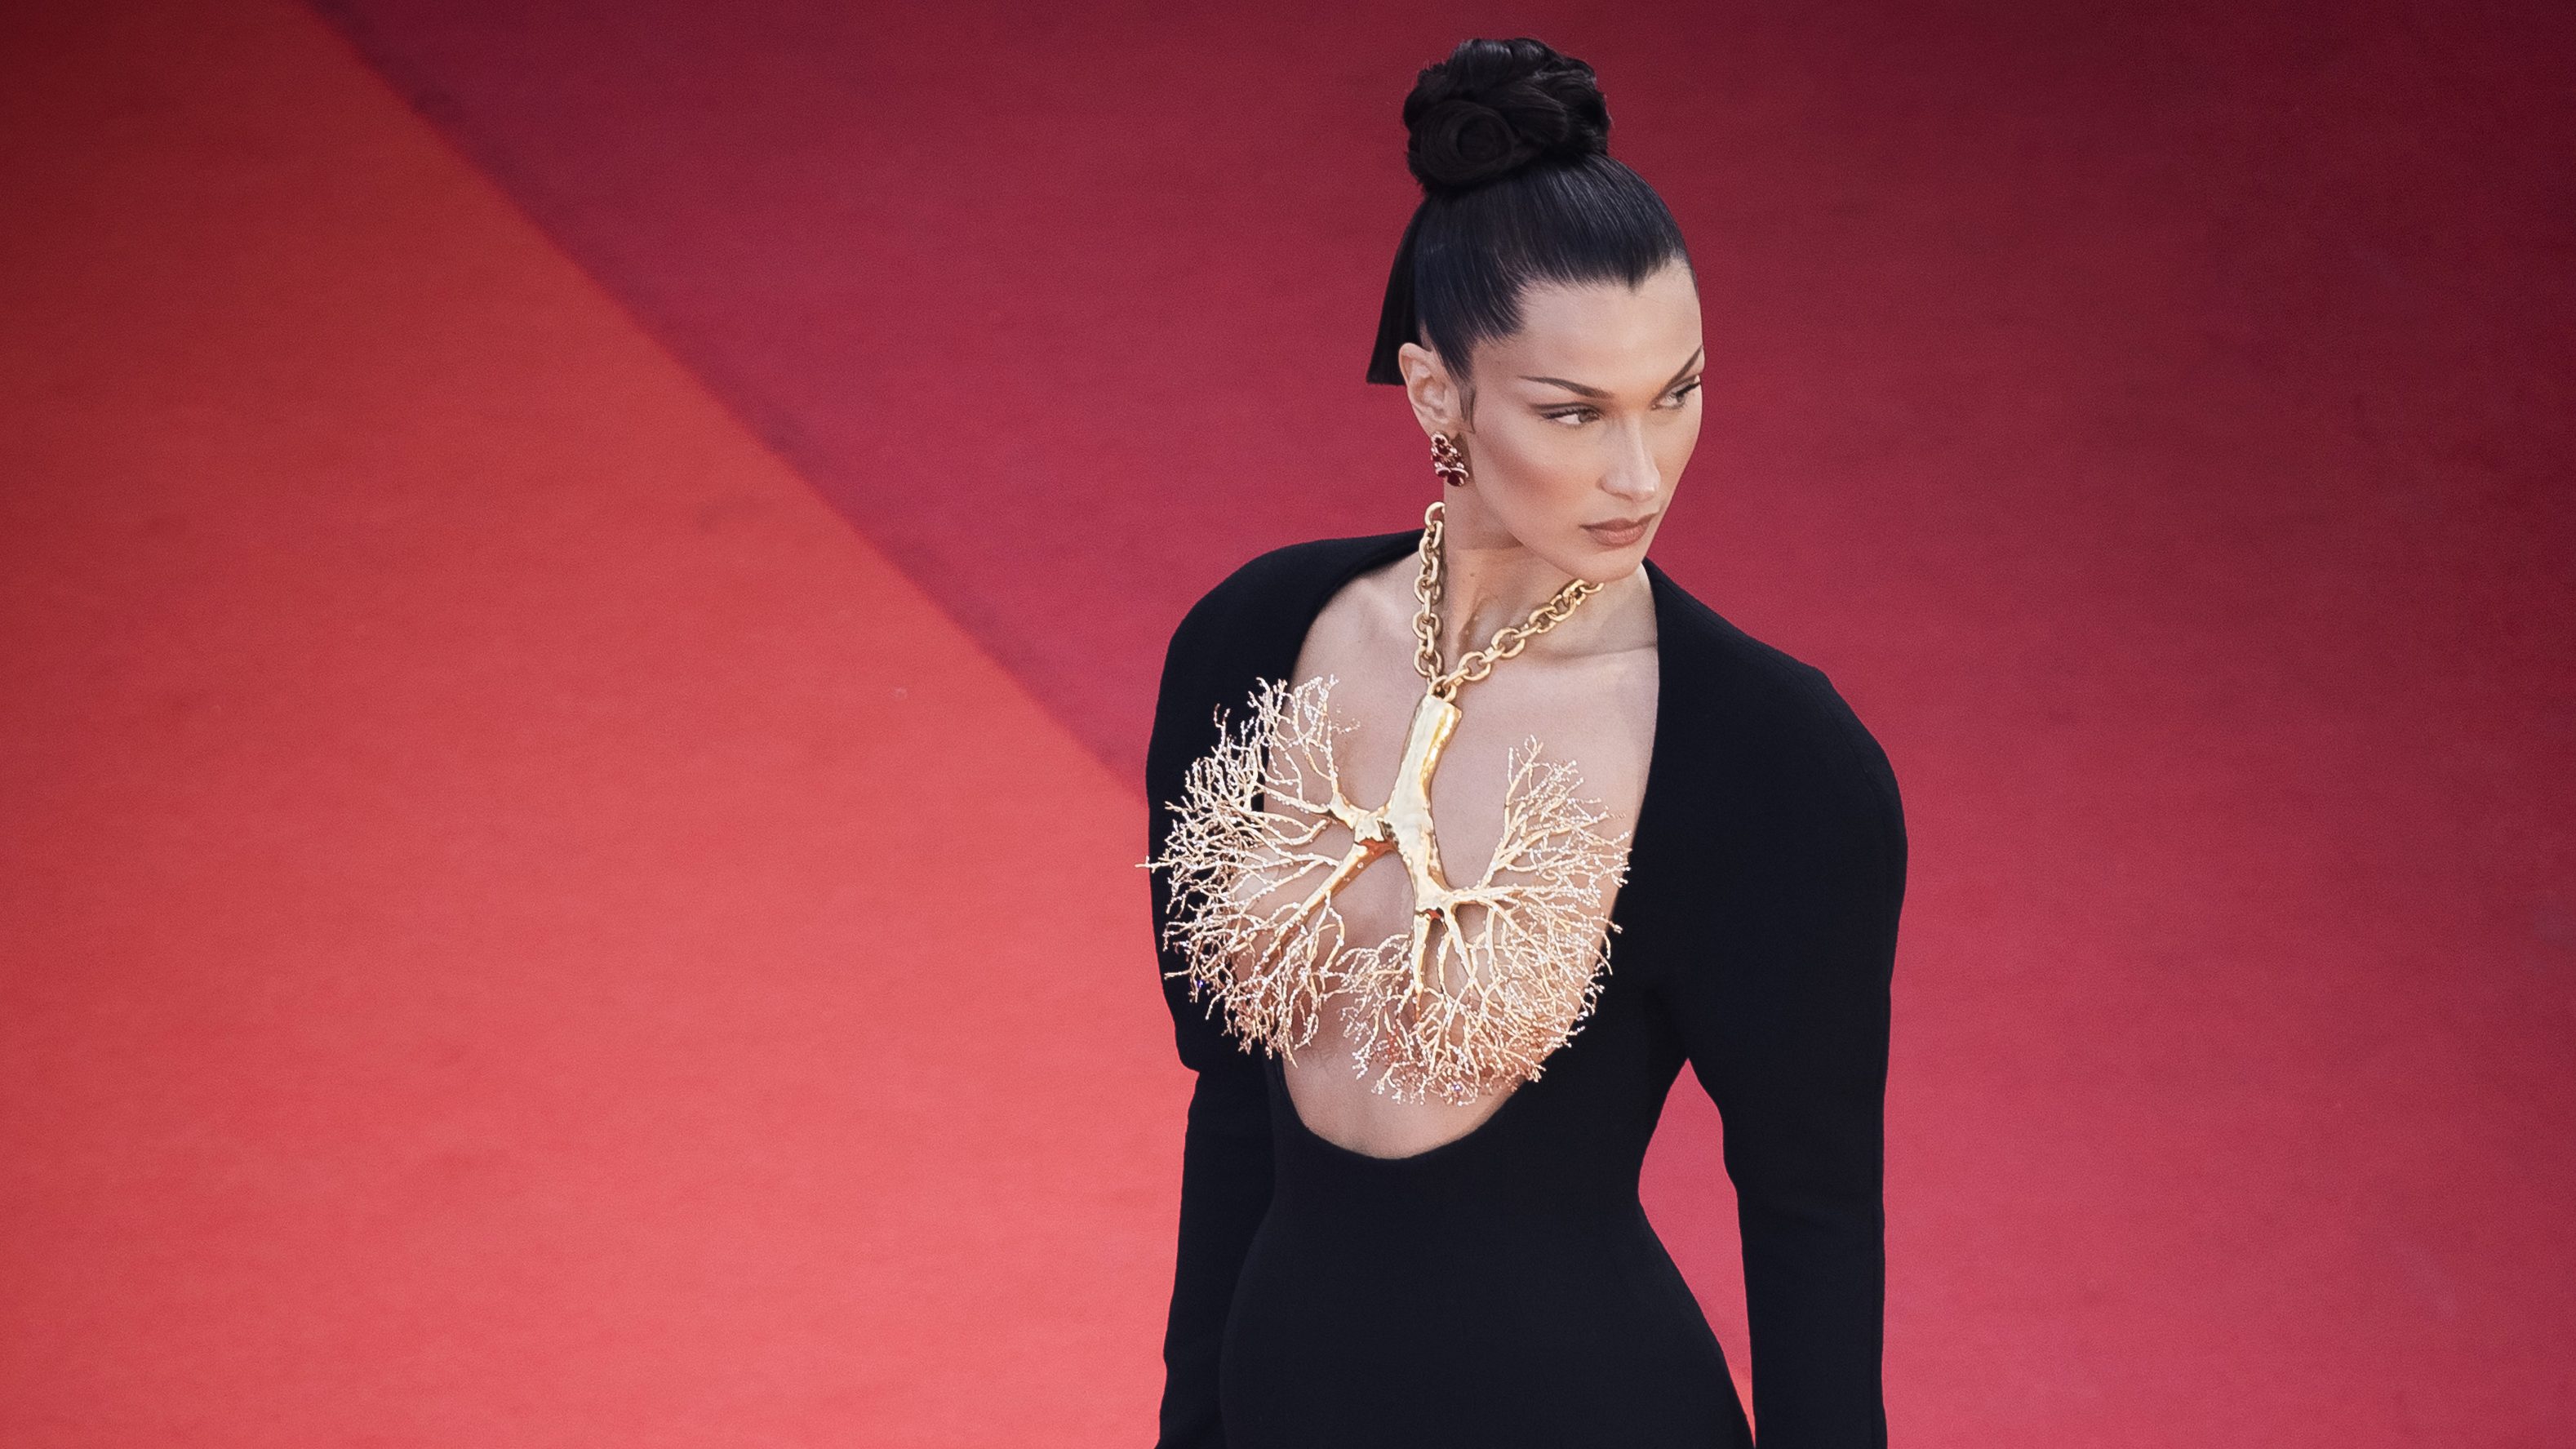 Bella Hadid's Cannes Beauty: How to Get the Look – The Hollywood Reporter